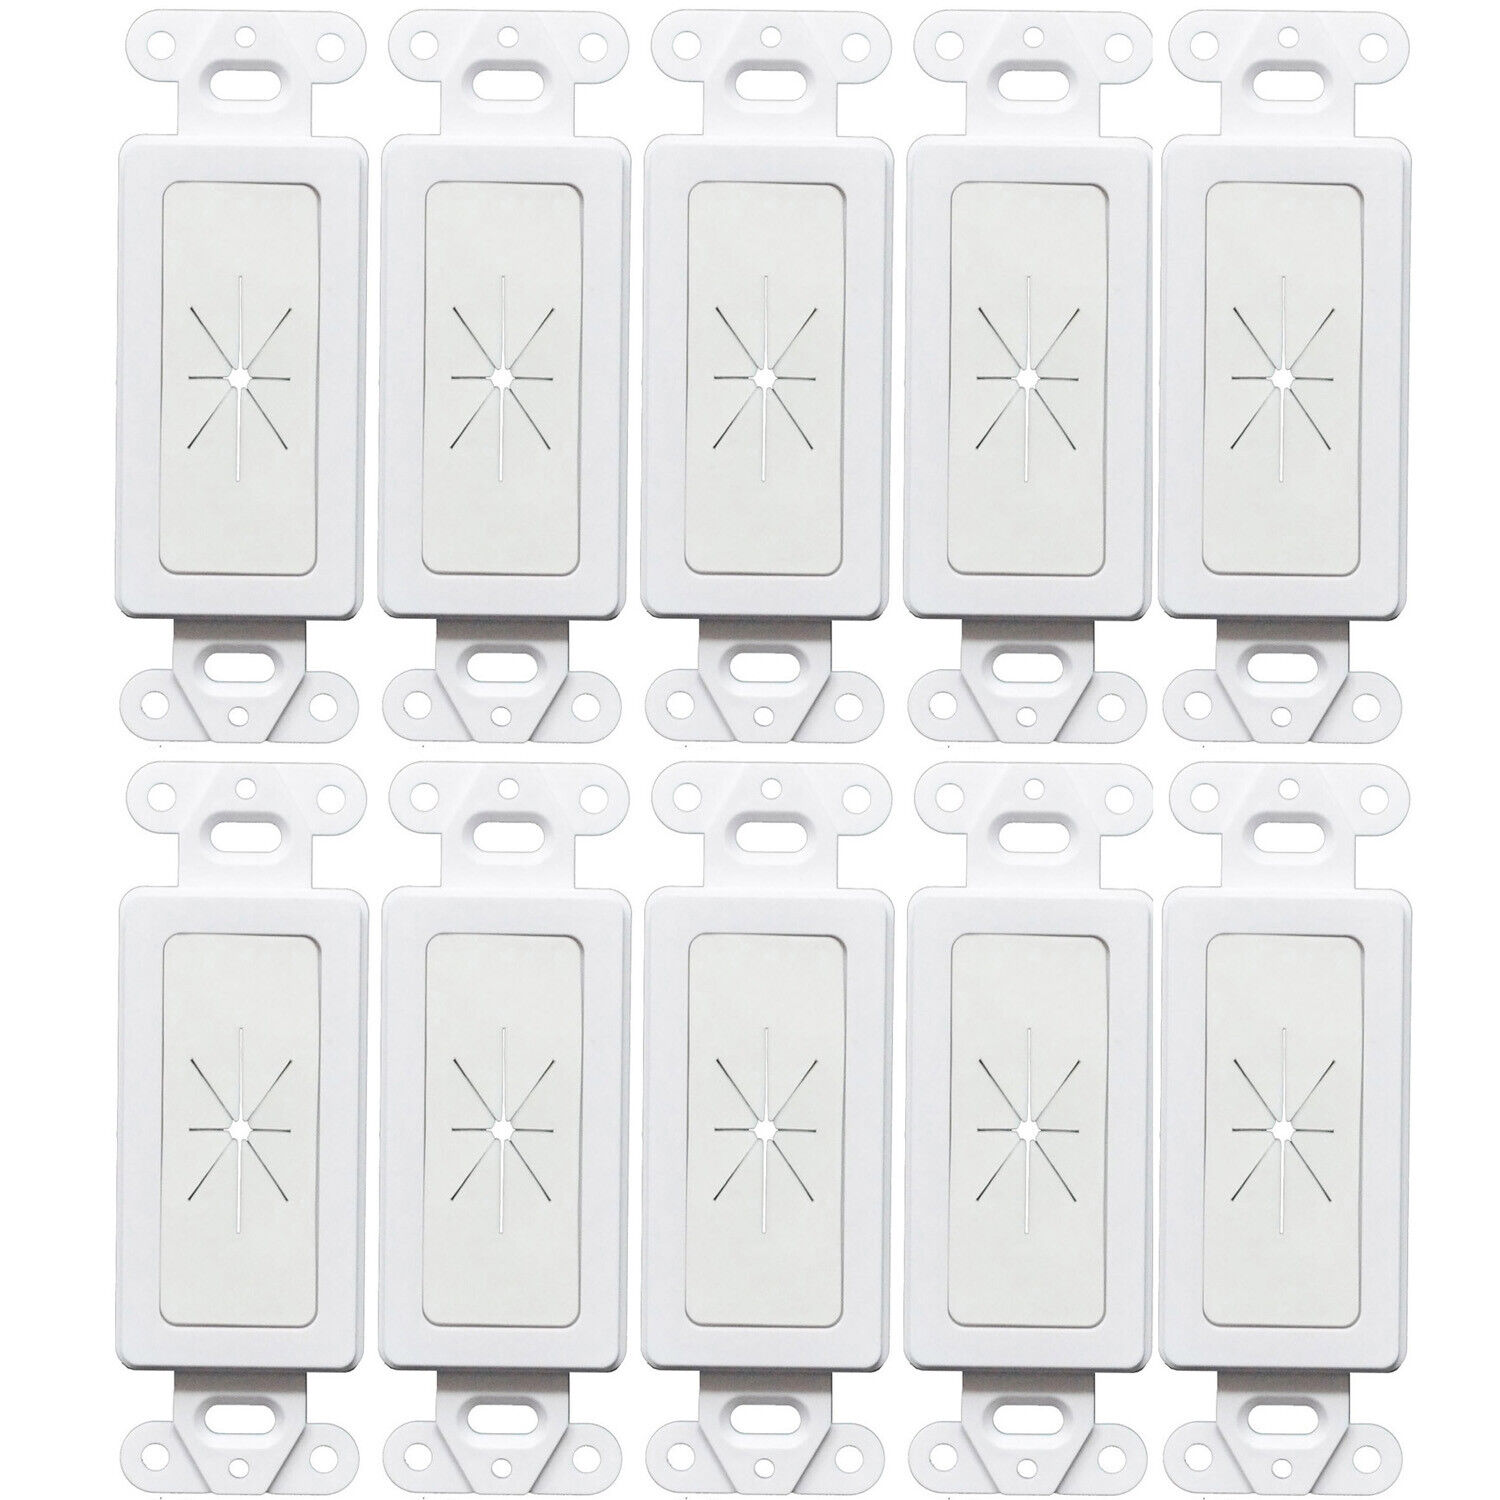 Decora Wall Plate 1-Gang Insert with Flexible Rubber Opening White (10 pack)